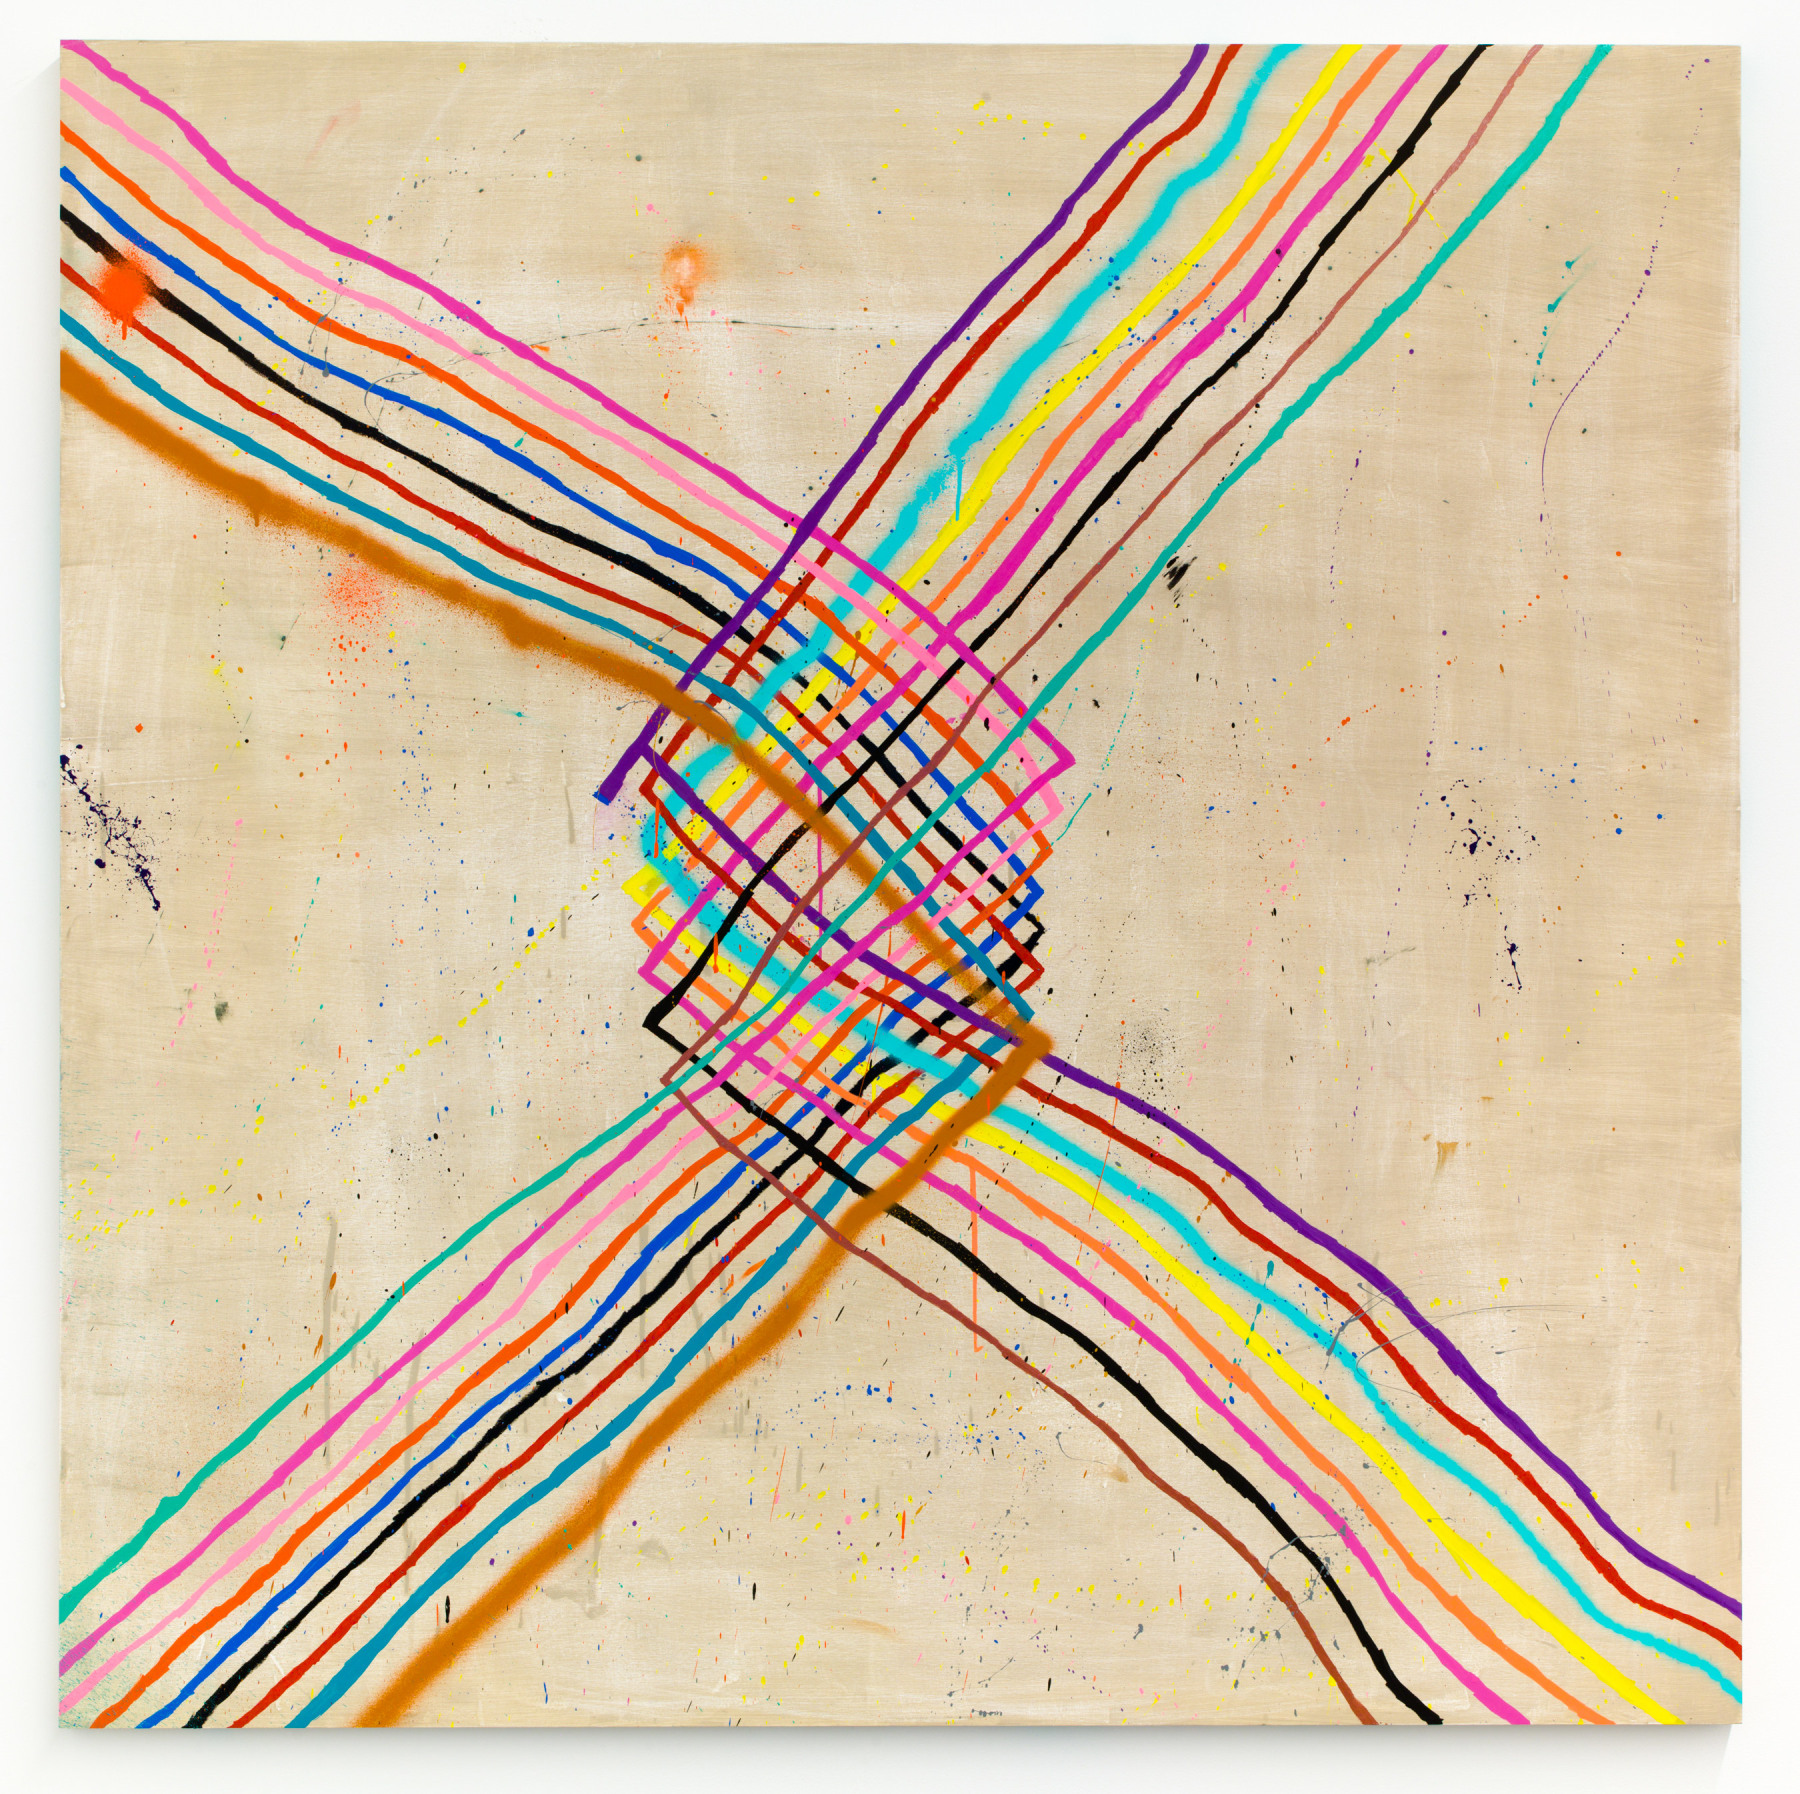 Untitled, 2017, Spray paint, latex paint, pencil and crayon on wood, 60 x 60 inches